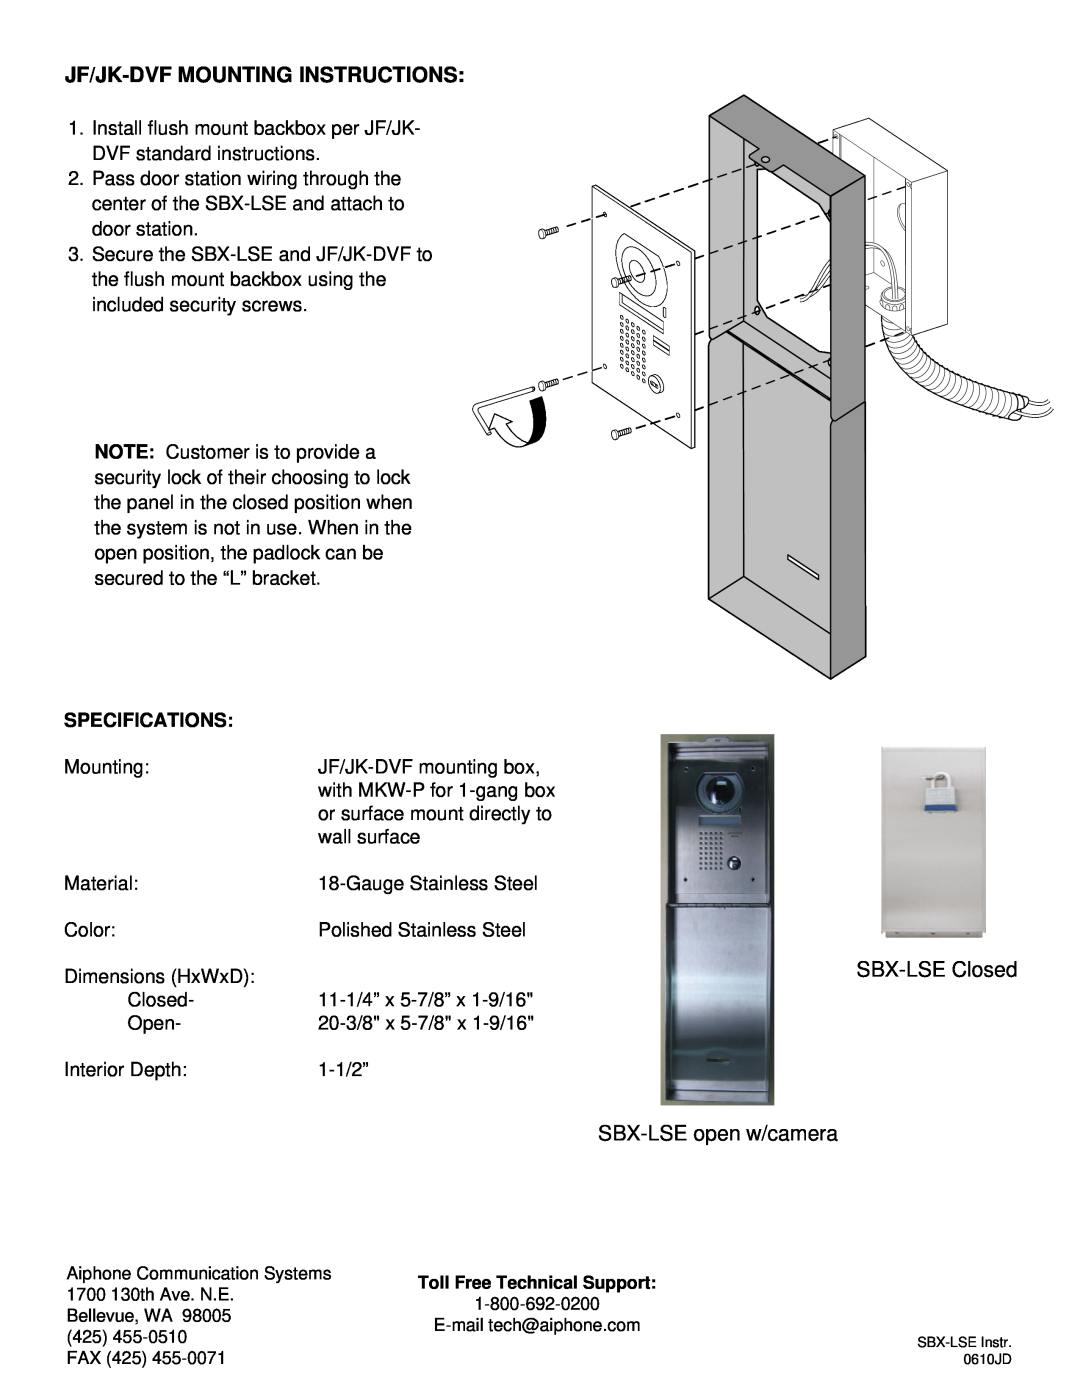 Aiphone JF-DV manual Jf/Jk-Dvfmounting Instructions, Specifications, SBX-LSEopen w/camera 